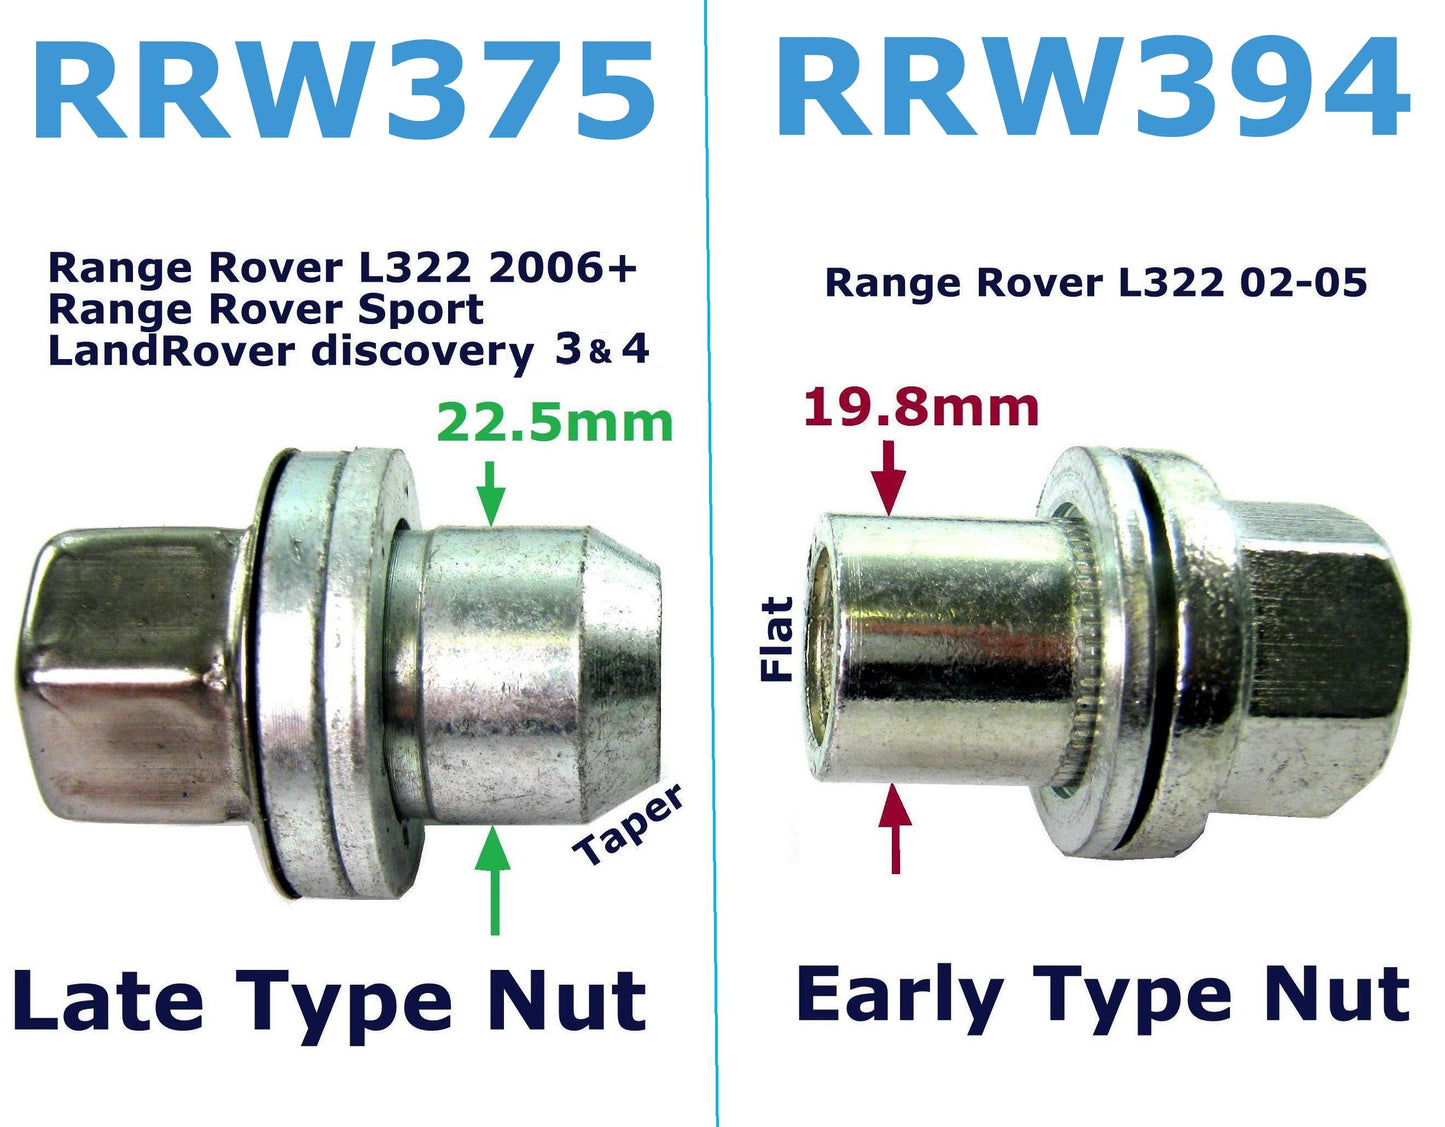 Silver Wheel Nuts (x 20) for Range Rover L322 (2002-2005)